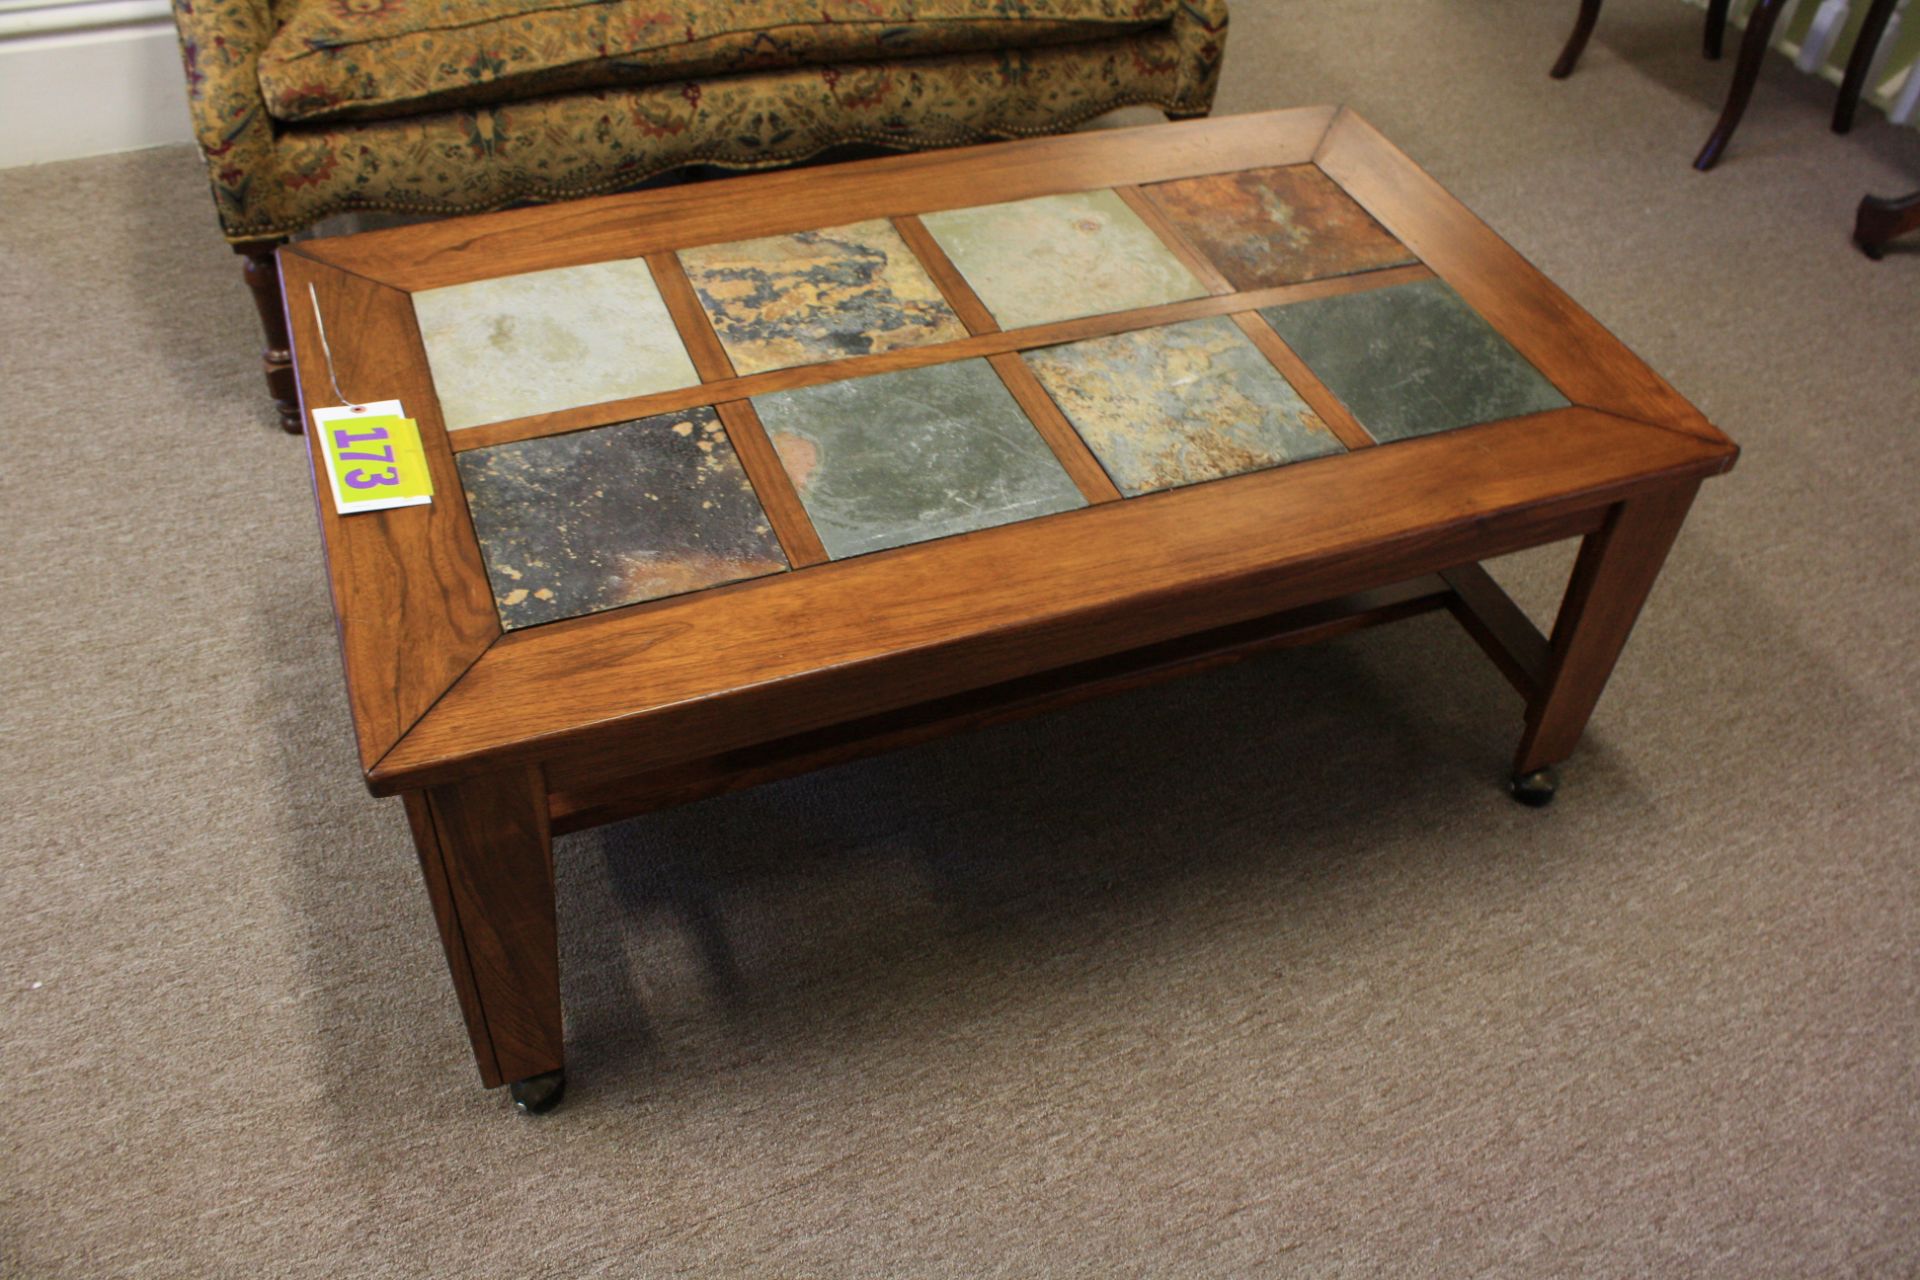 Coffee Table - 48"W x 28"D x 19"H, w/Stone Inlay - Image 2 of 3